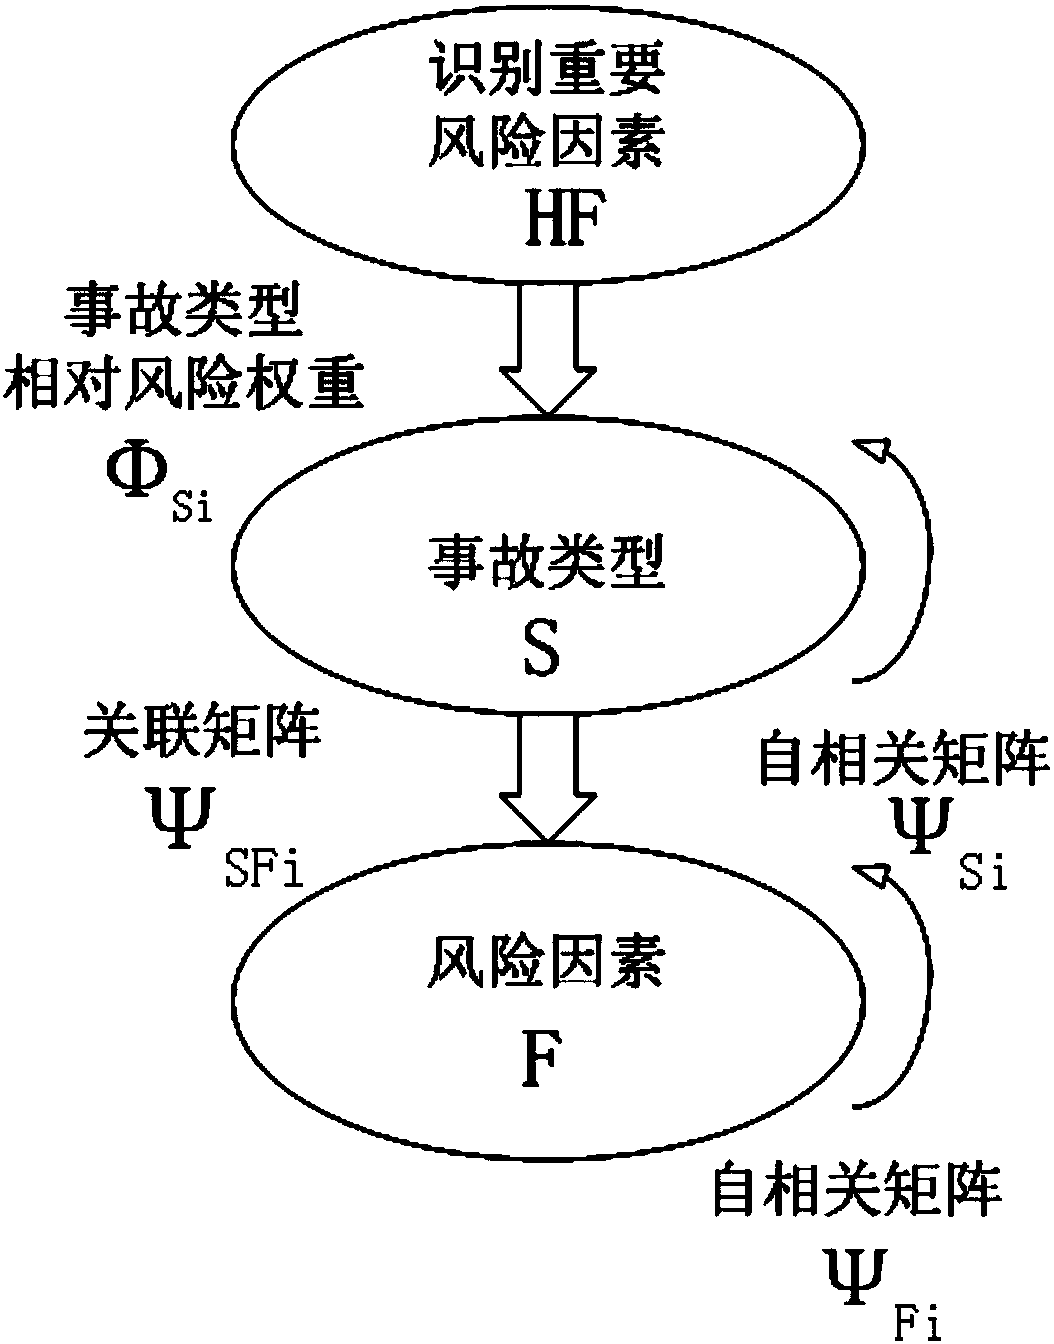 Safety risk recognition and evaluation method for transformer substation project based on QFD